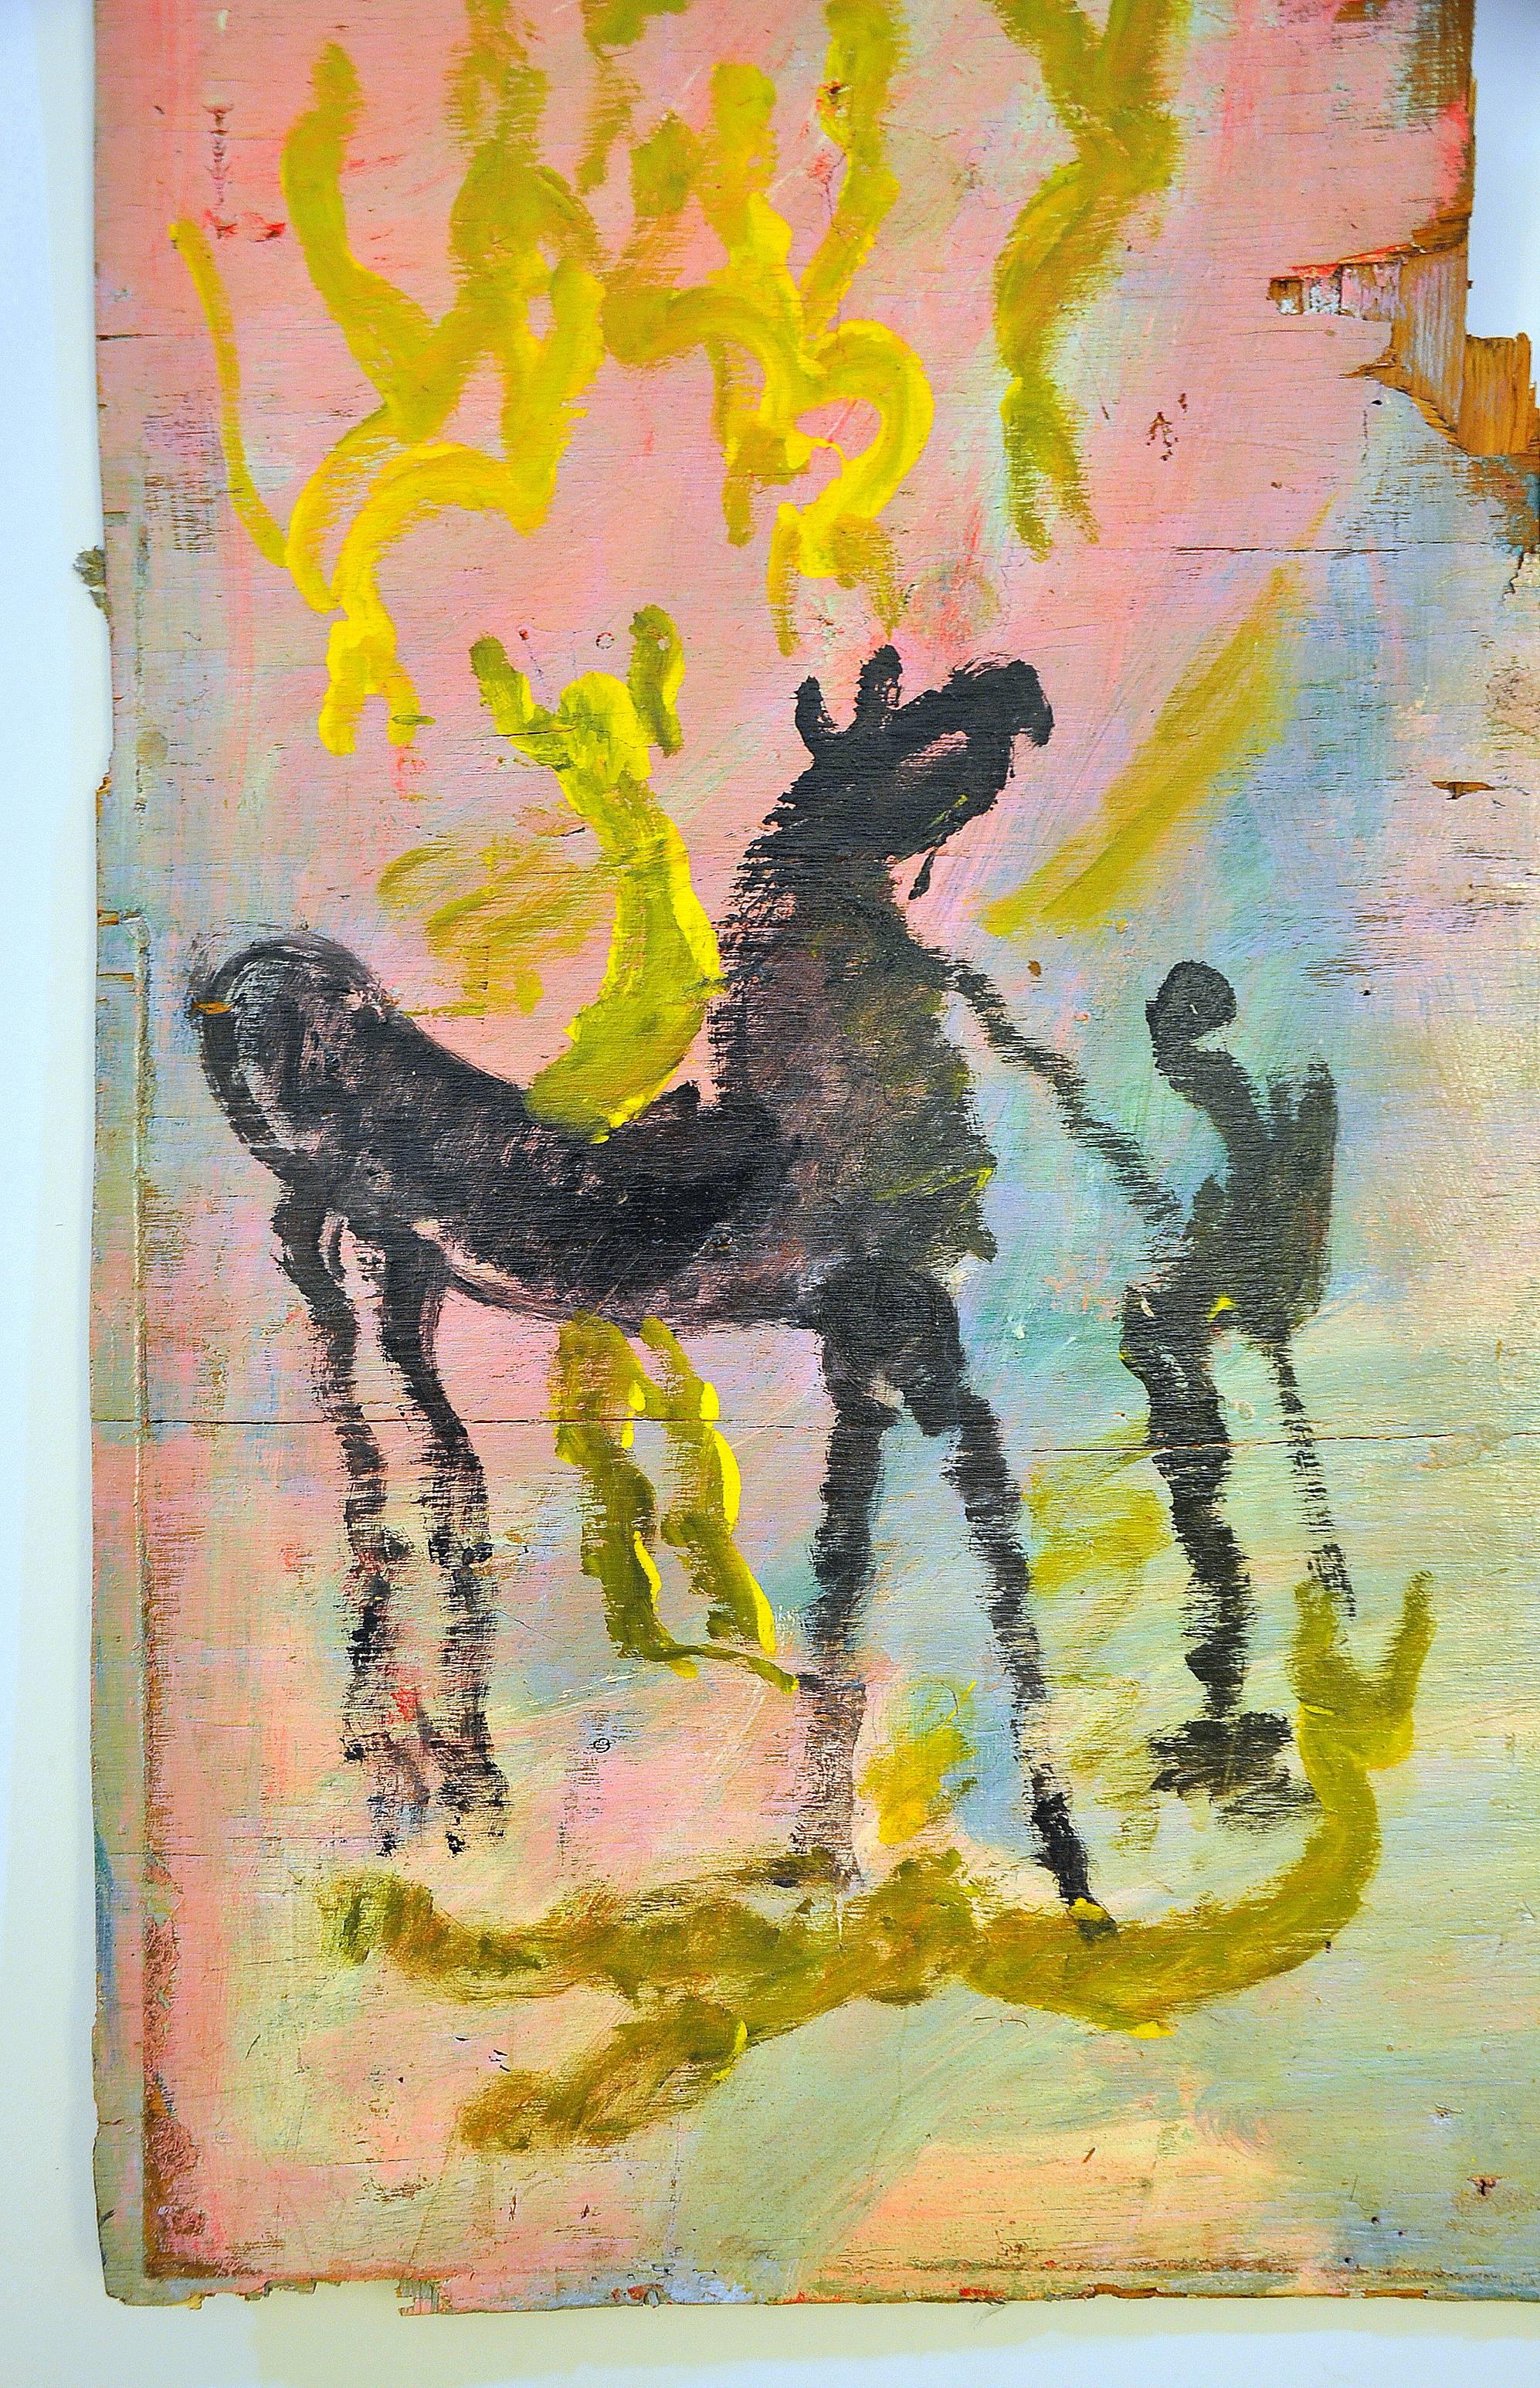 A captivating work featuring oil painting on found board, with graffiti covered backside, by self-taught artist Purvis Young (February 4, 1943 – April 20, 2010). The work depicts a scene of an individual next to a horse and the artist's instantly